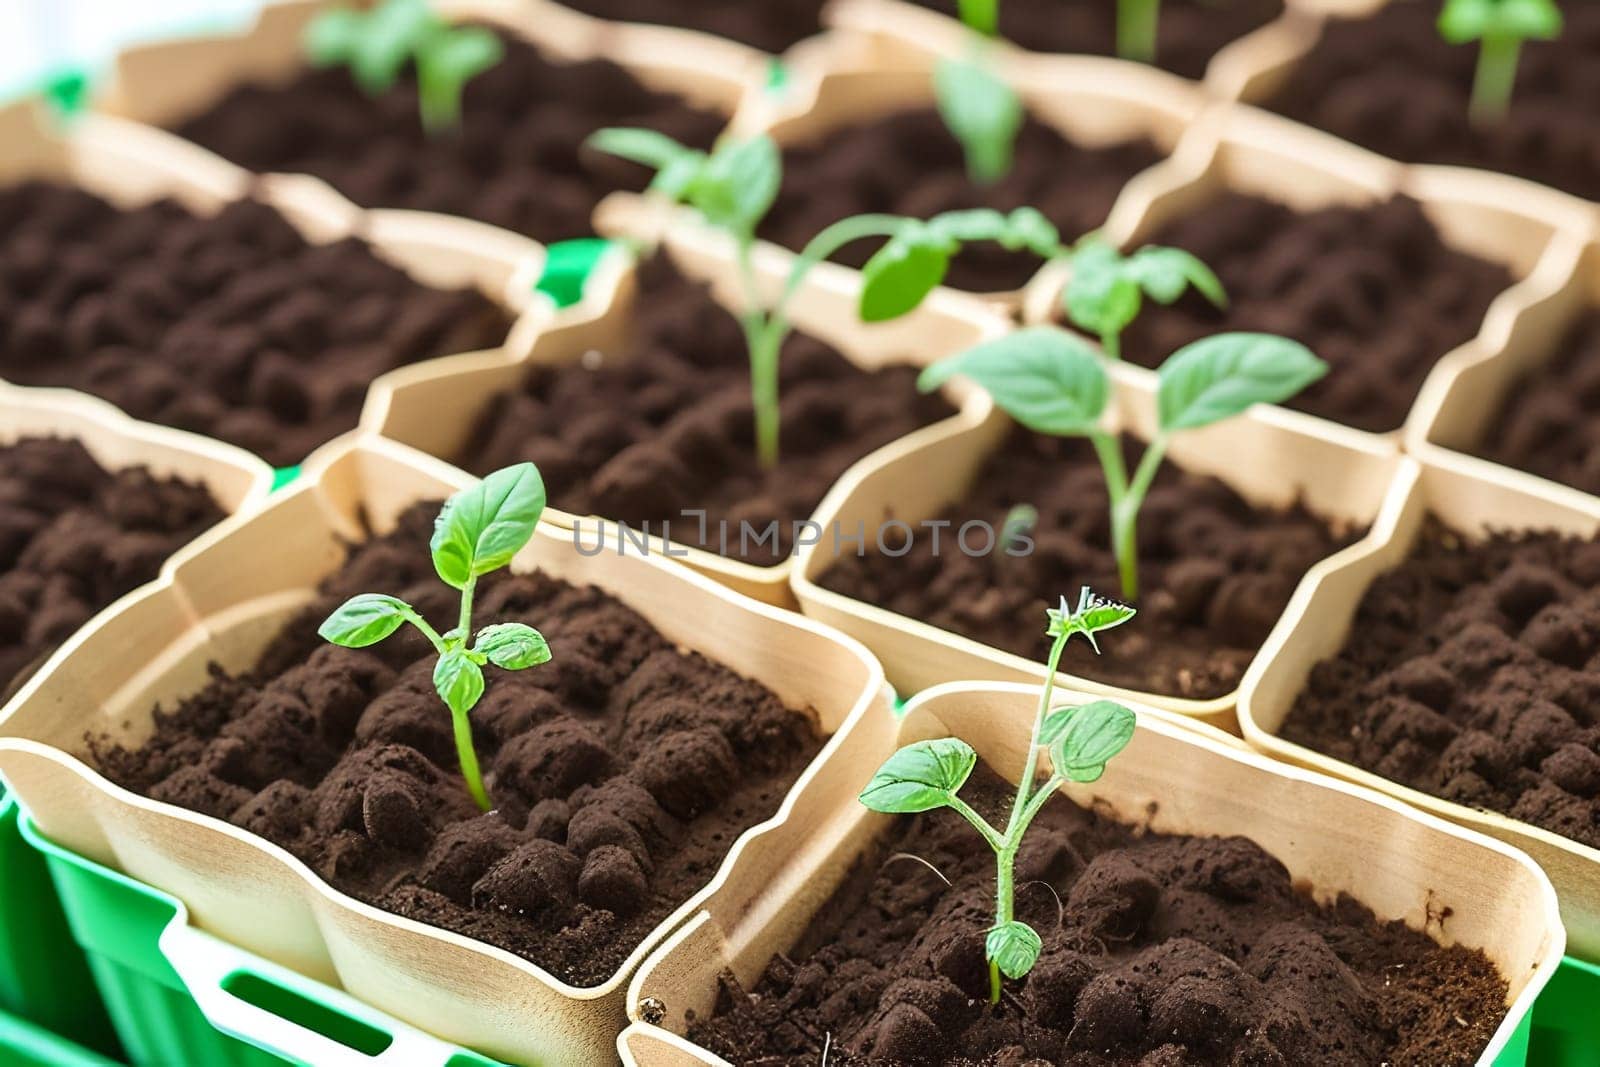 Tomato seedlings.The seedling of the bushes of tomatoes of different varieties. Sown tomatoes in cardboard peas with peat content